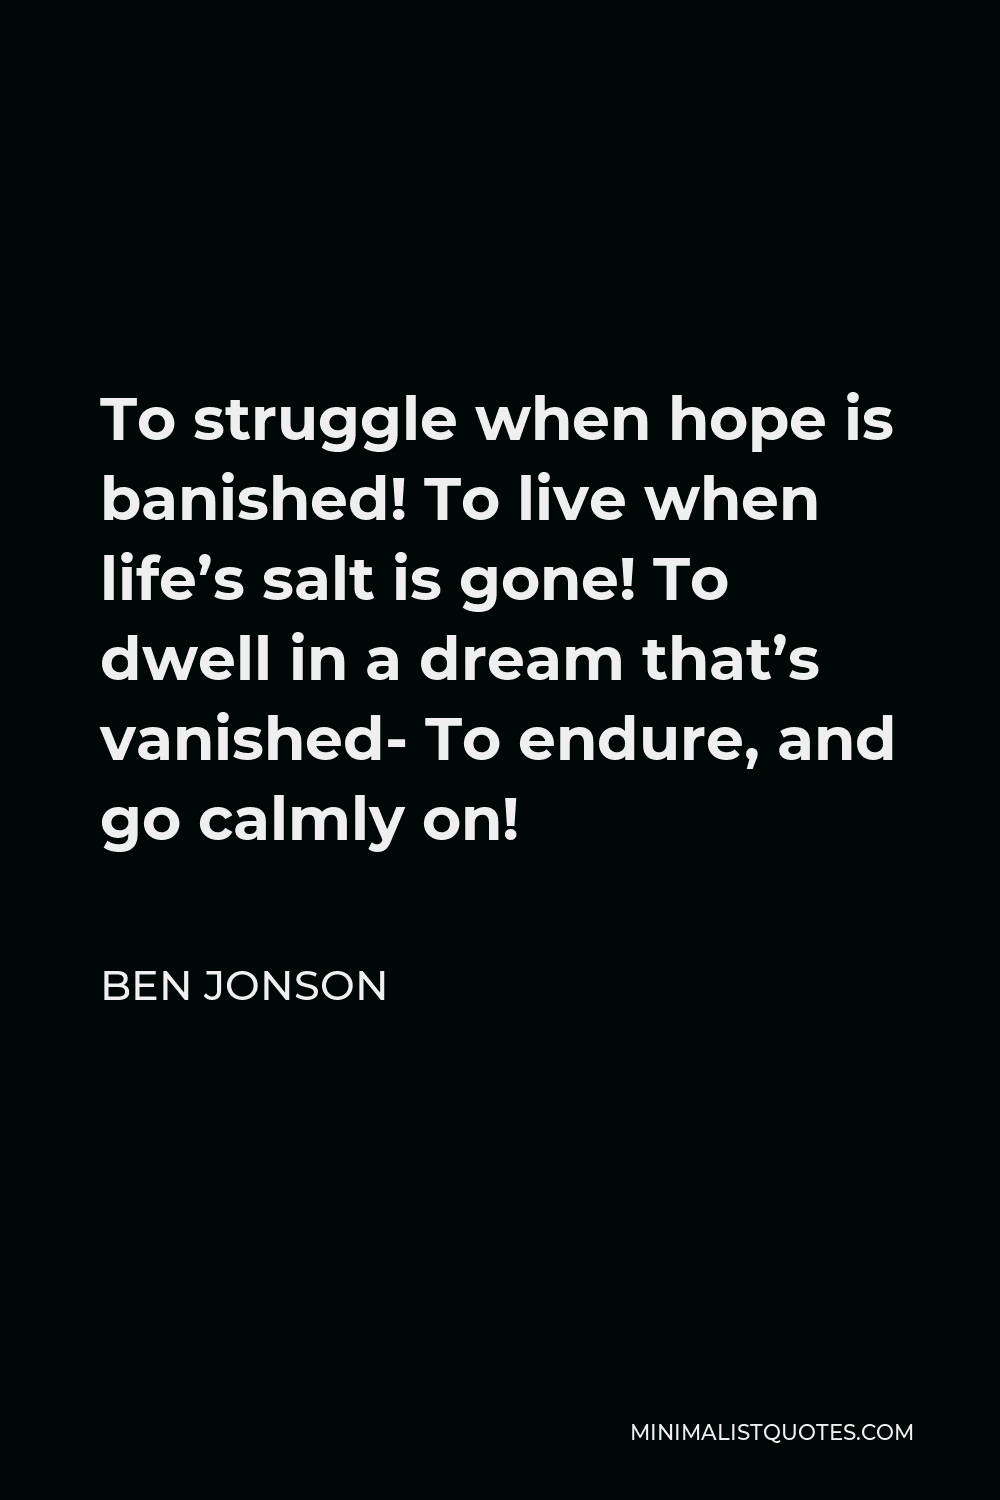 Ben Jonson Quote - To struggle when hope is banished! To live when life’s salt is gone! To dwell in a dream that’s vanished- To endure, and go calmly on!